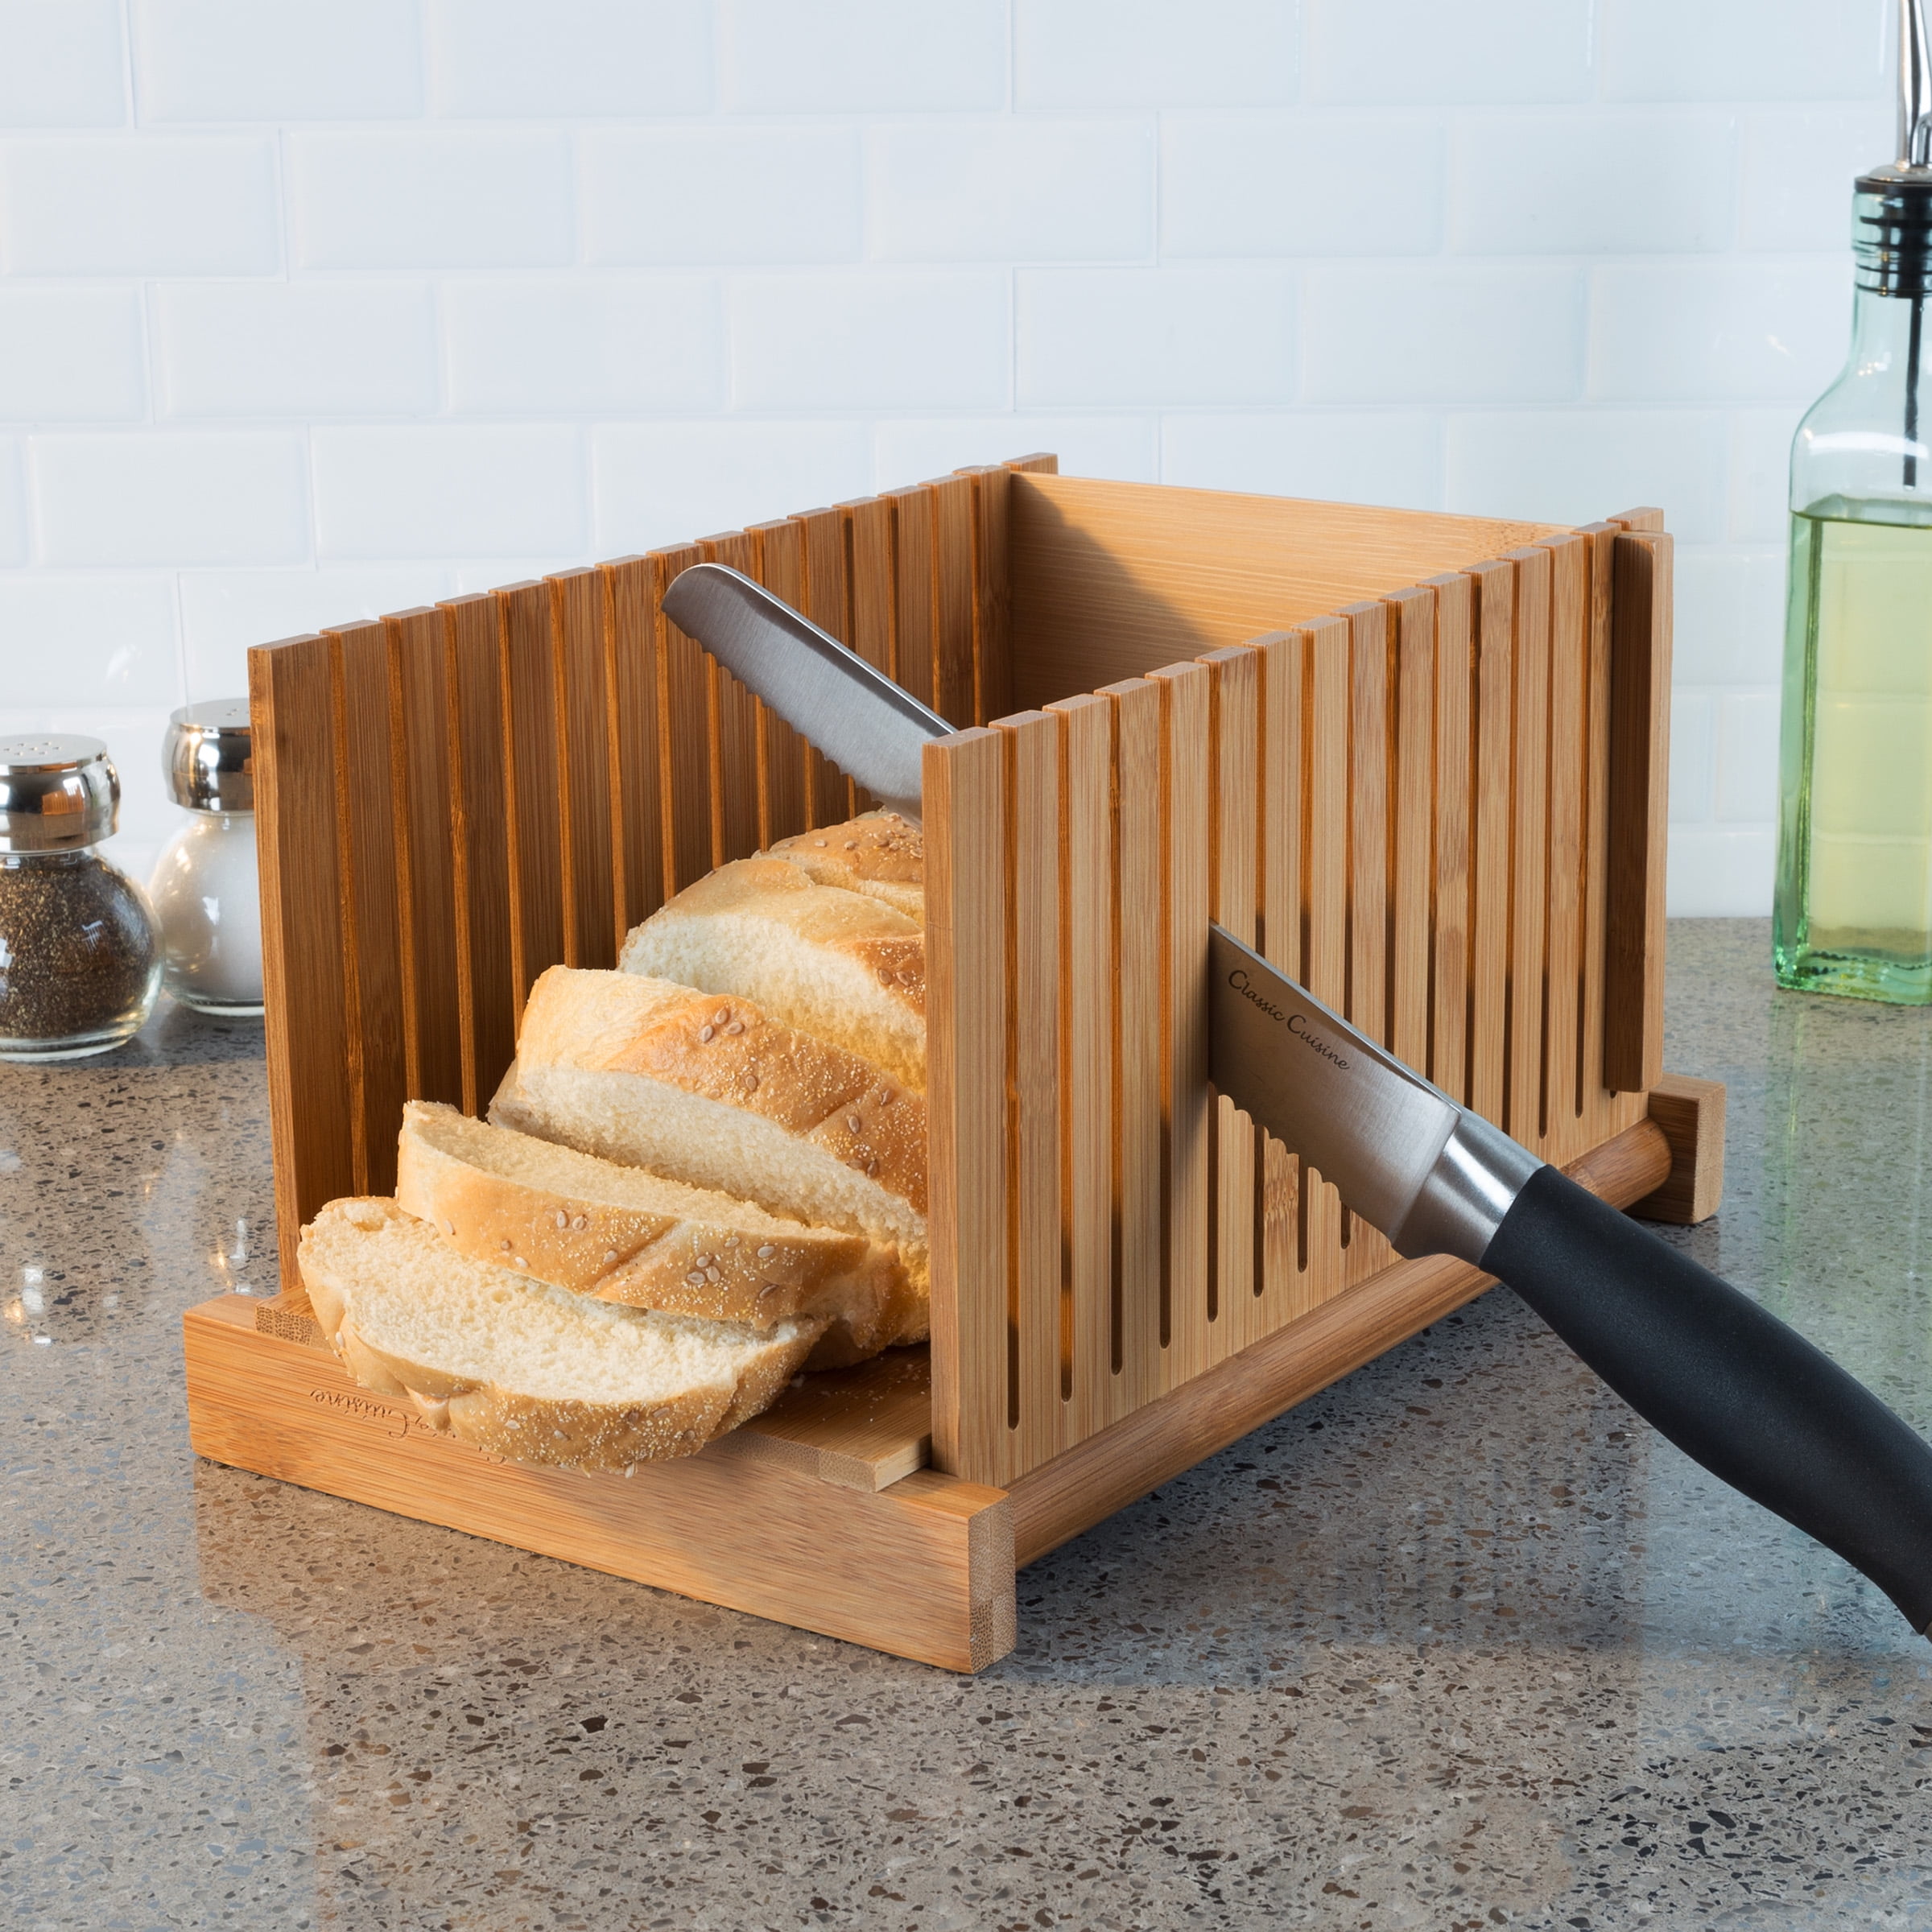 Bamboo Bread Slicer- Foldable, Adjustable Knife Guide and Board for Cutting  Loaves Evenly- Perfect Food Prep Tool for Home Bakers by Classic Cuisine